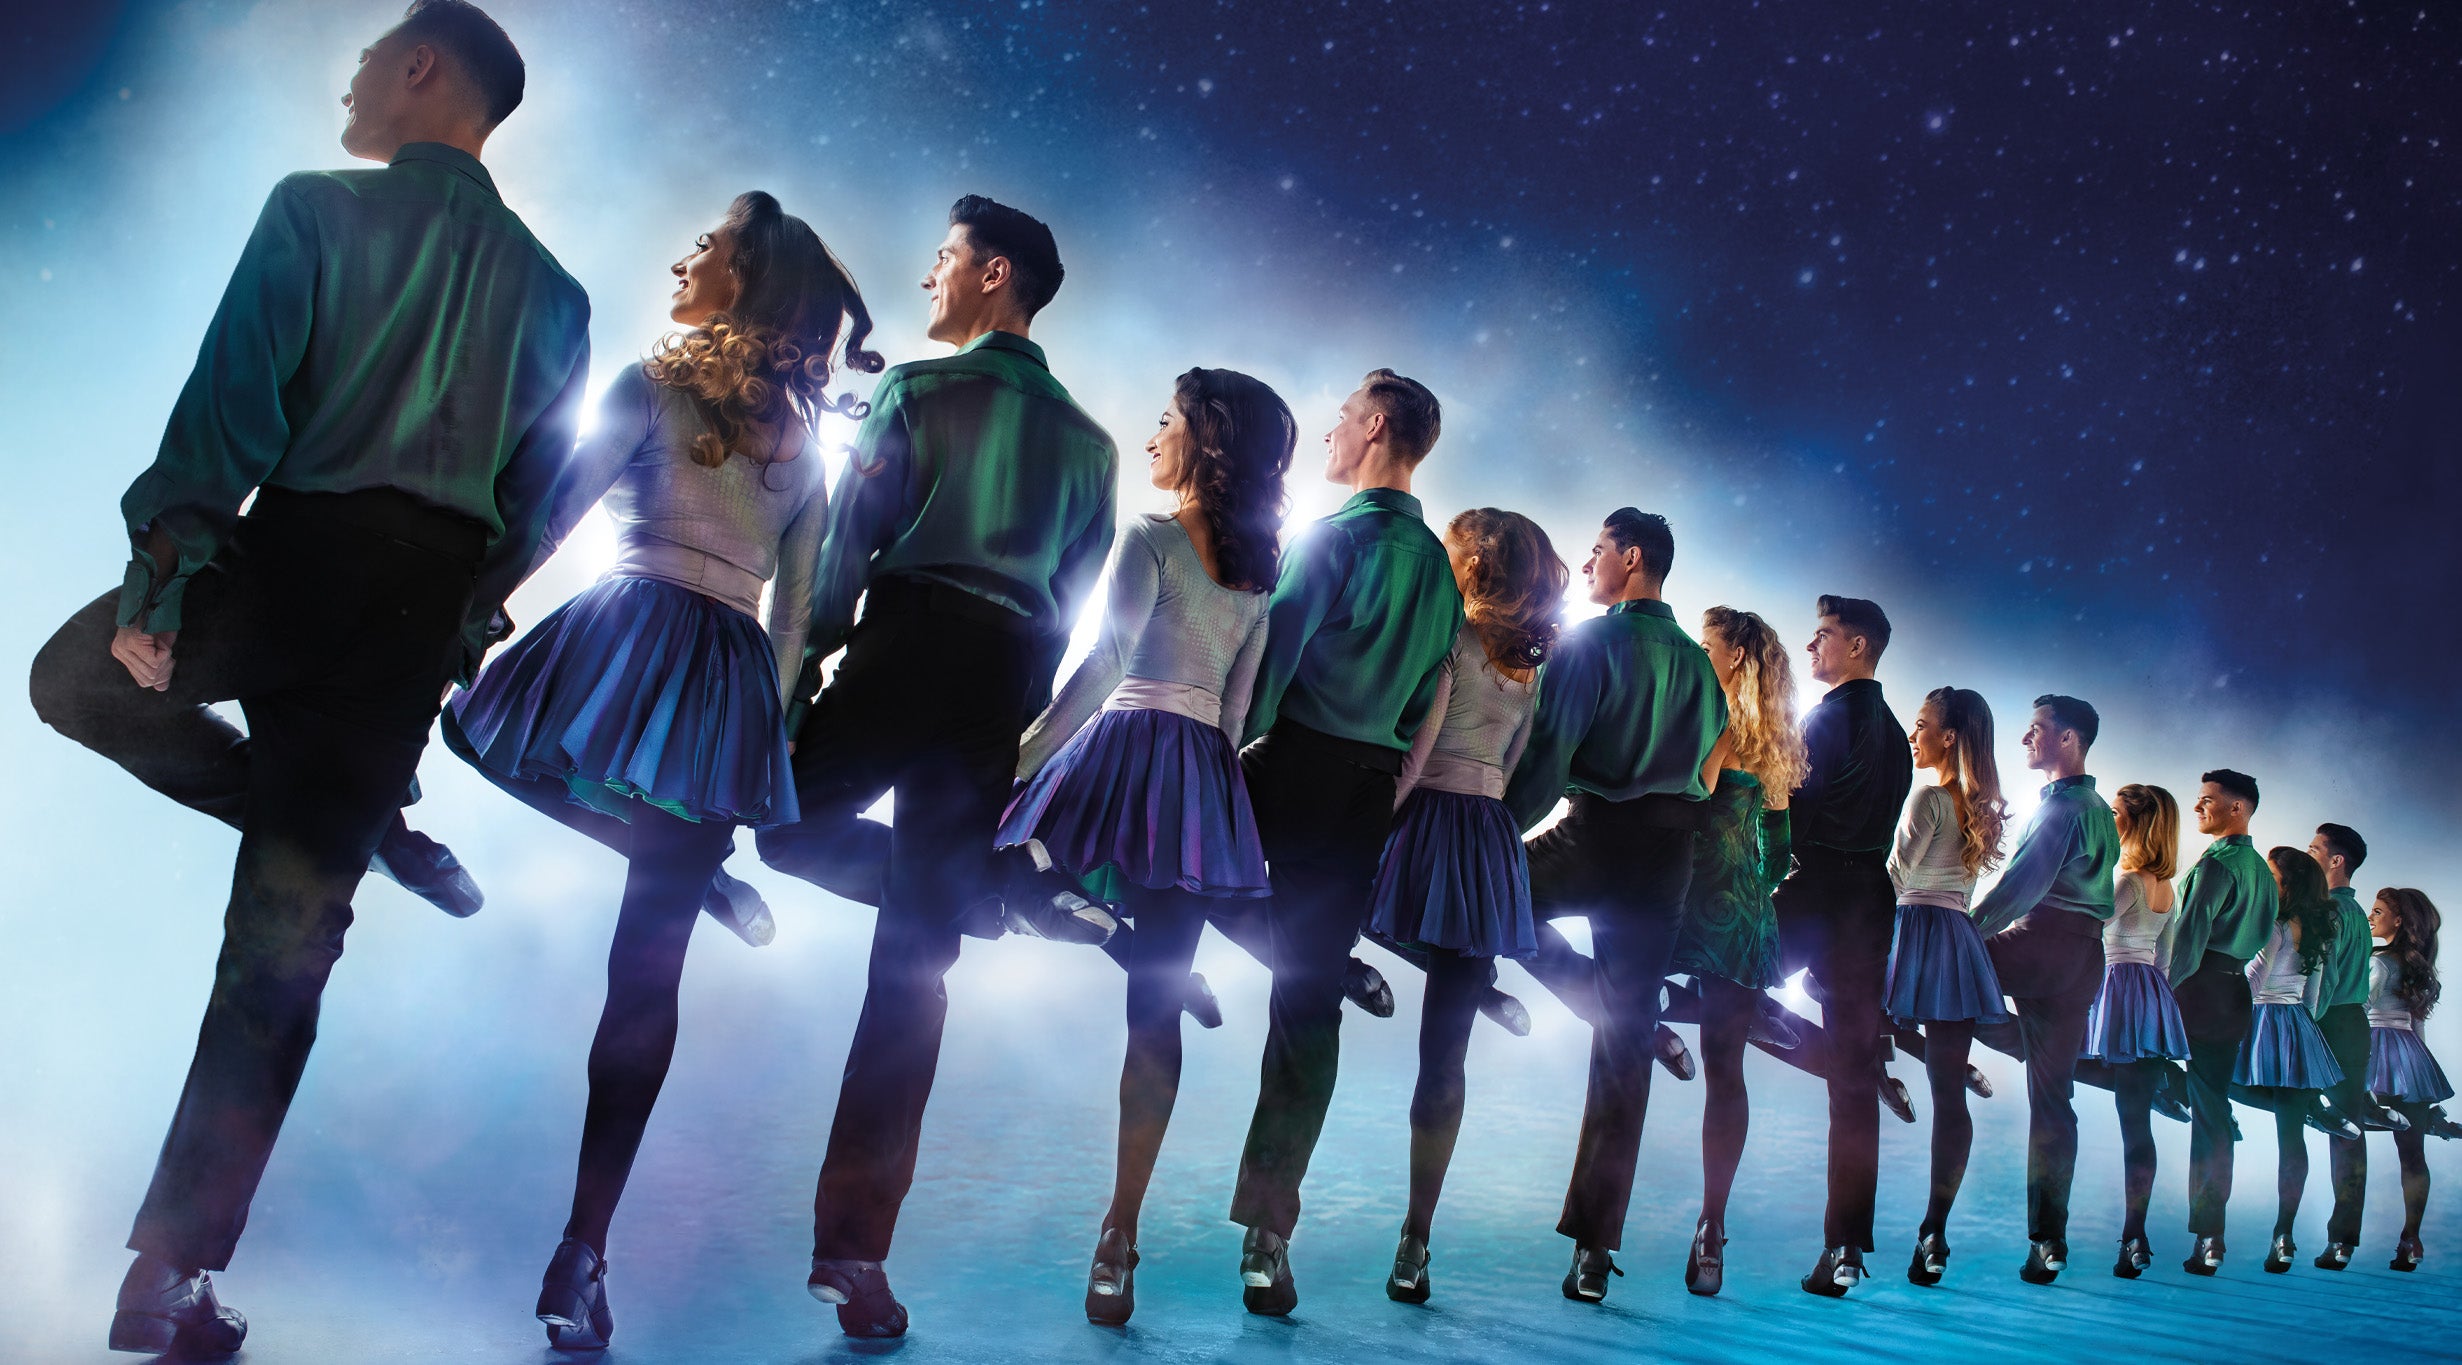 Riverdance 30: The New Generation pre-sale code for real tickets in Newcastle Upon Tyne